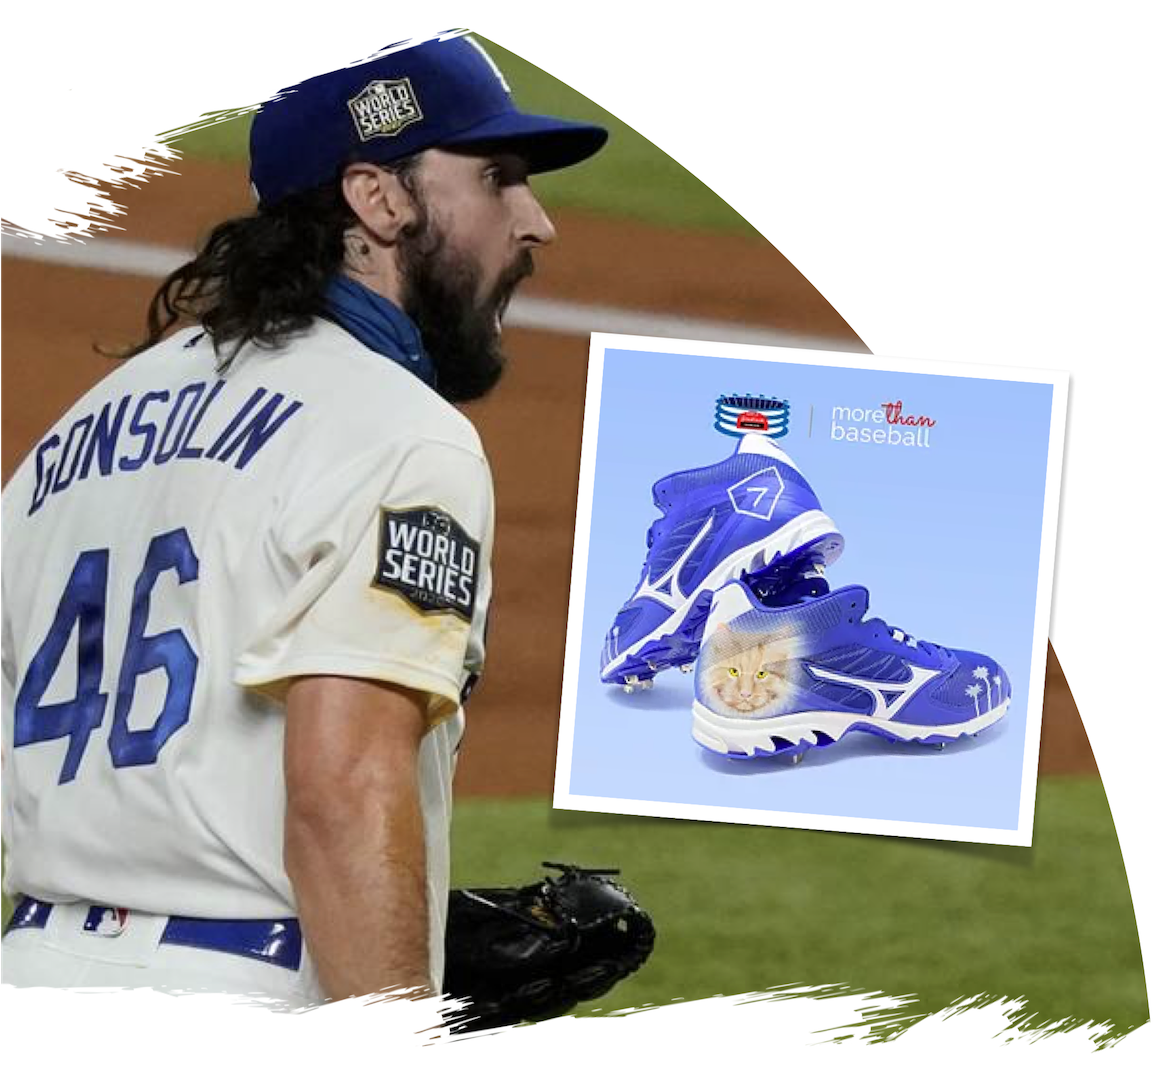 Dodgers' Tony Gonsolin designs cleats to help minor leaguers - Los